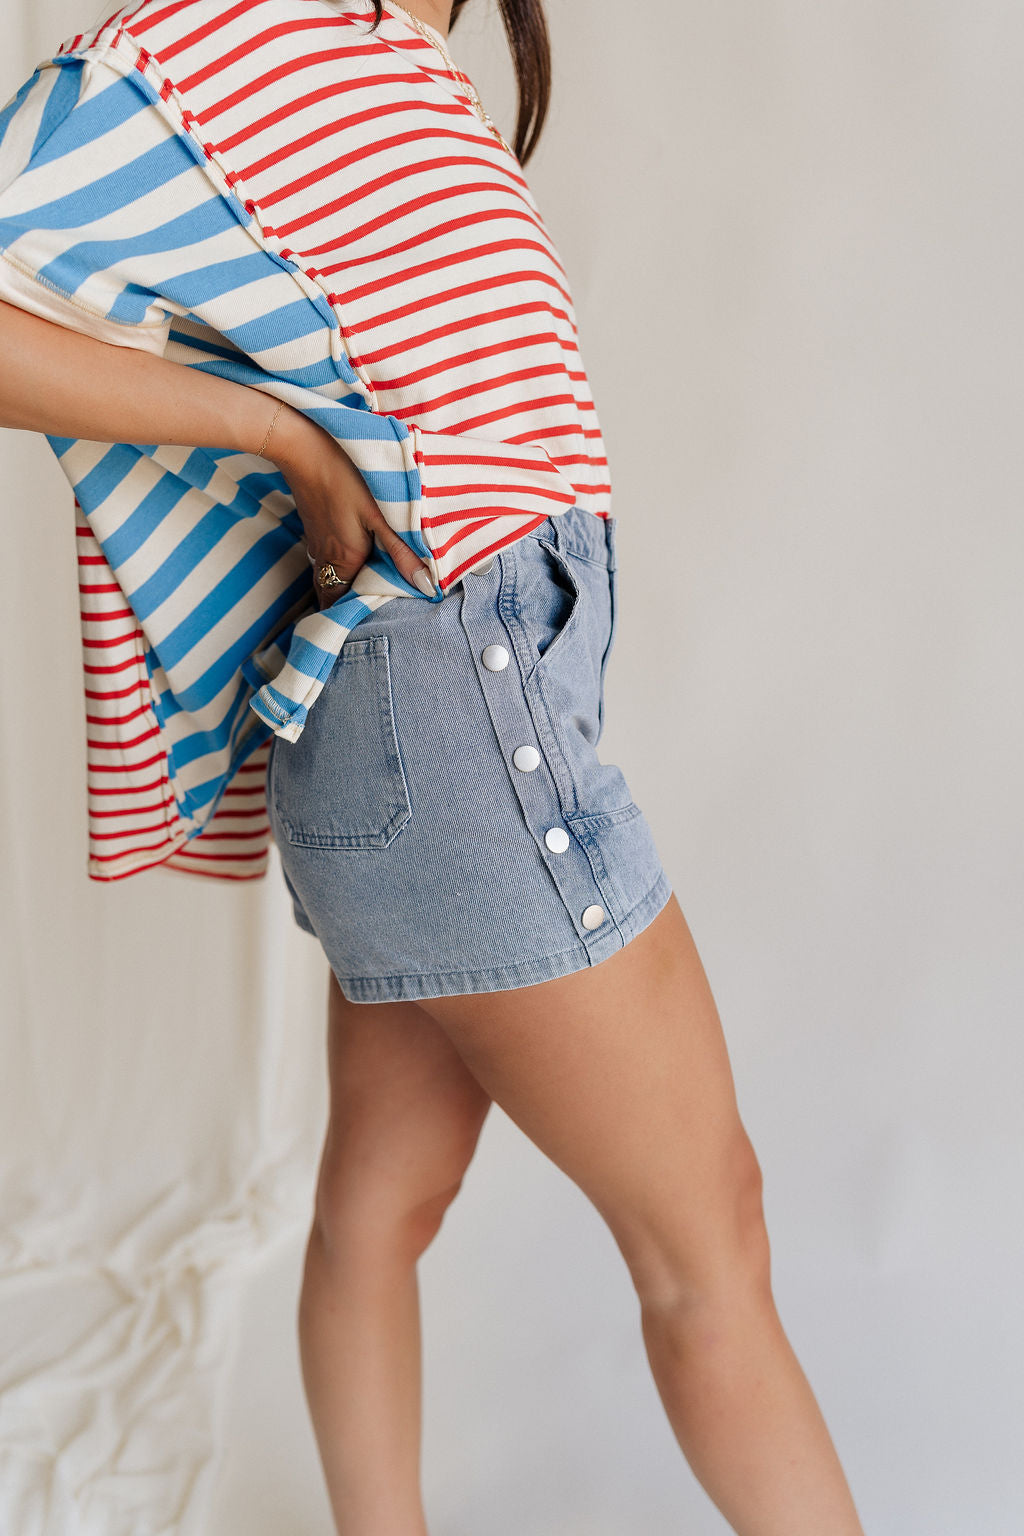 Close side view of female model wearing the Hailey Silver Stud Denim Shorts that have light wash denim, silver stud details, pockets, and a front zipper.